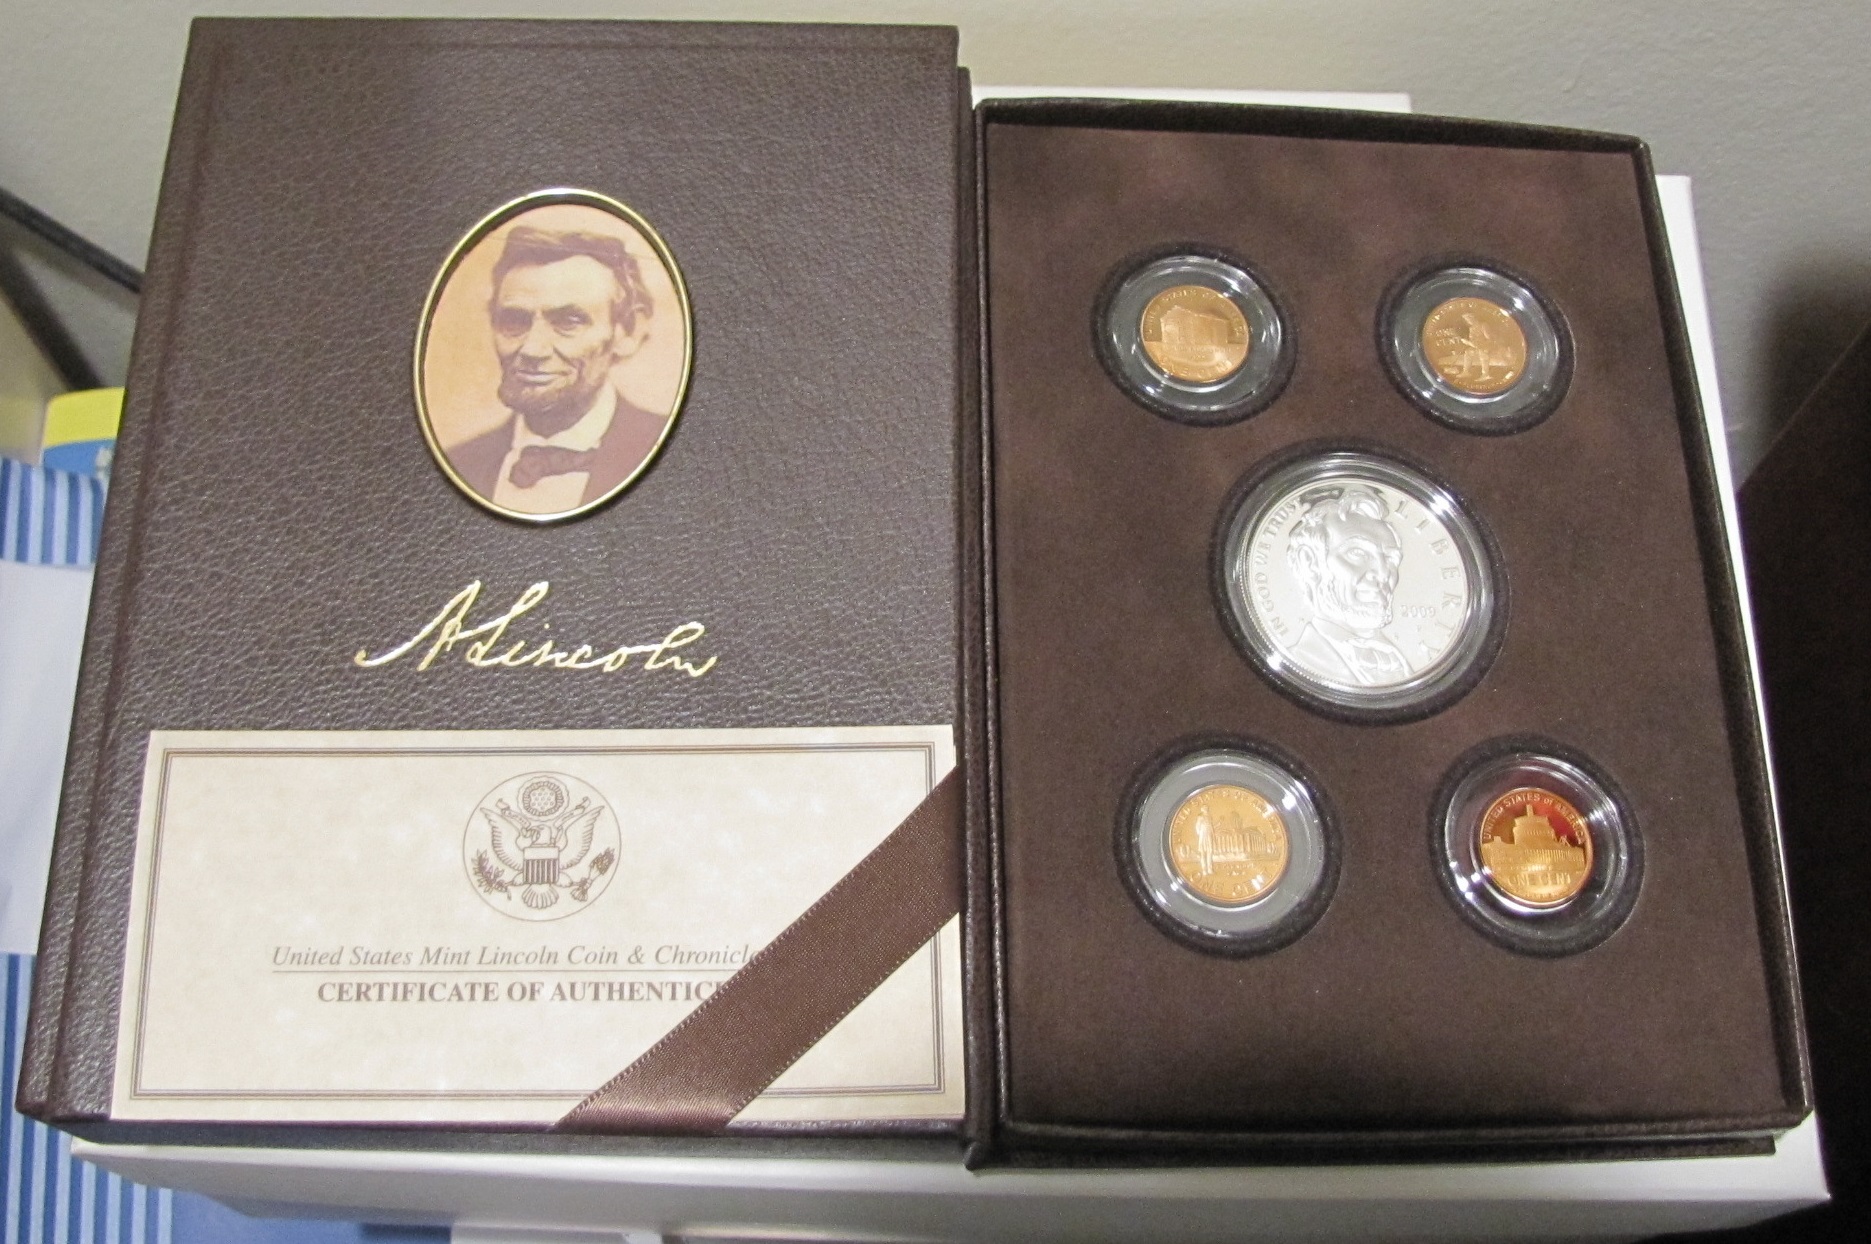 United States Mint Lincoln Coin and Chronicles Set (LN6) 002a.JPG